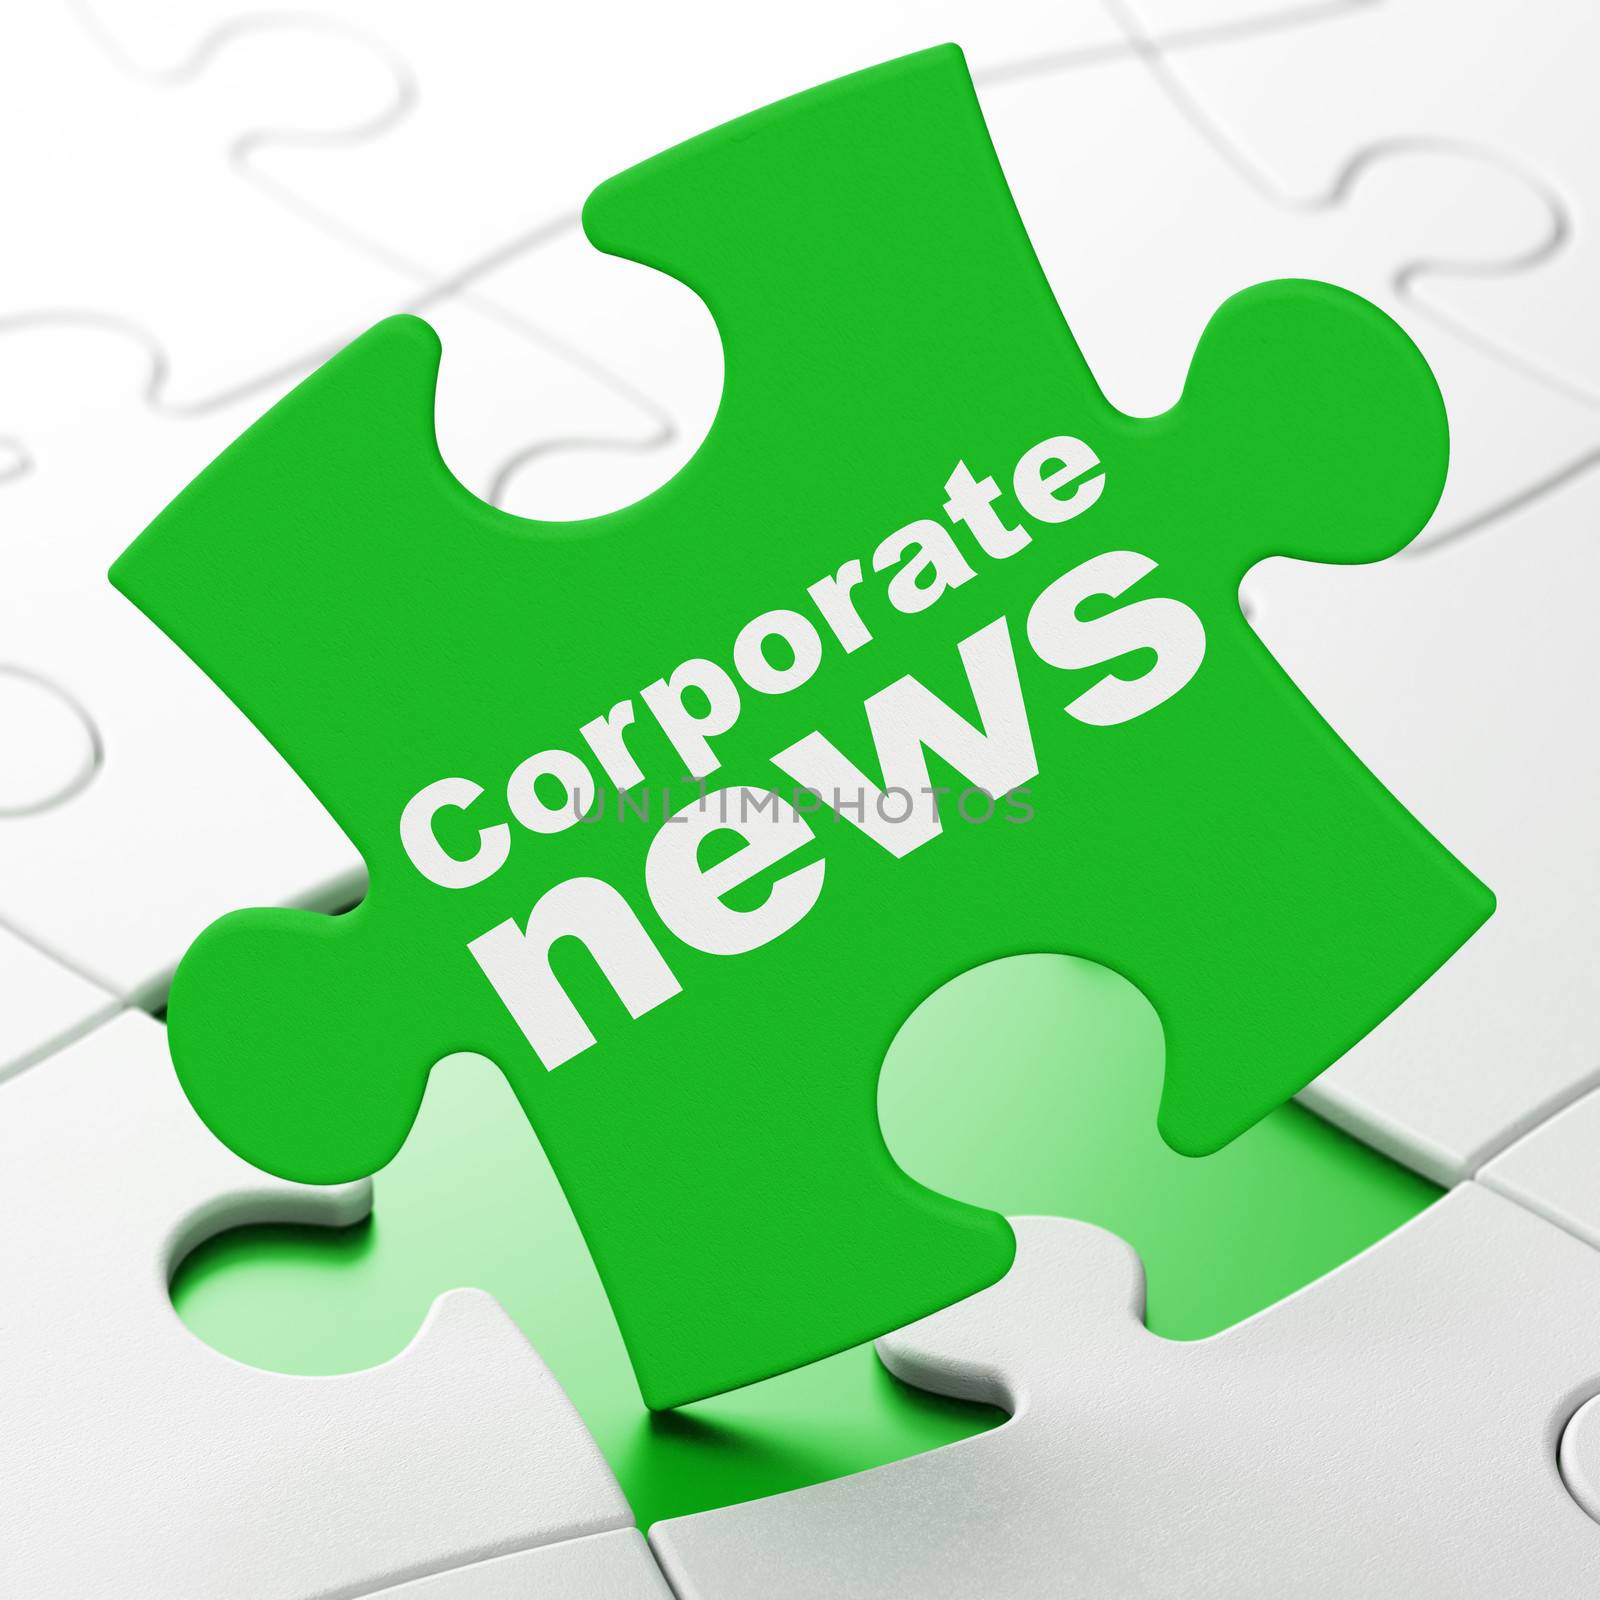 News concept: Corporate News on Green puzzle pieces background, 3d render